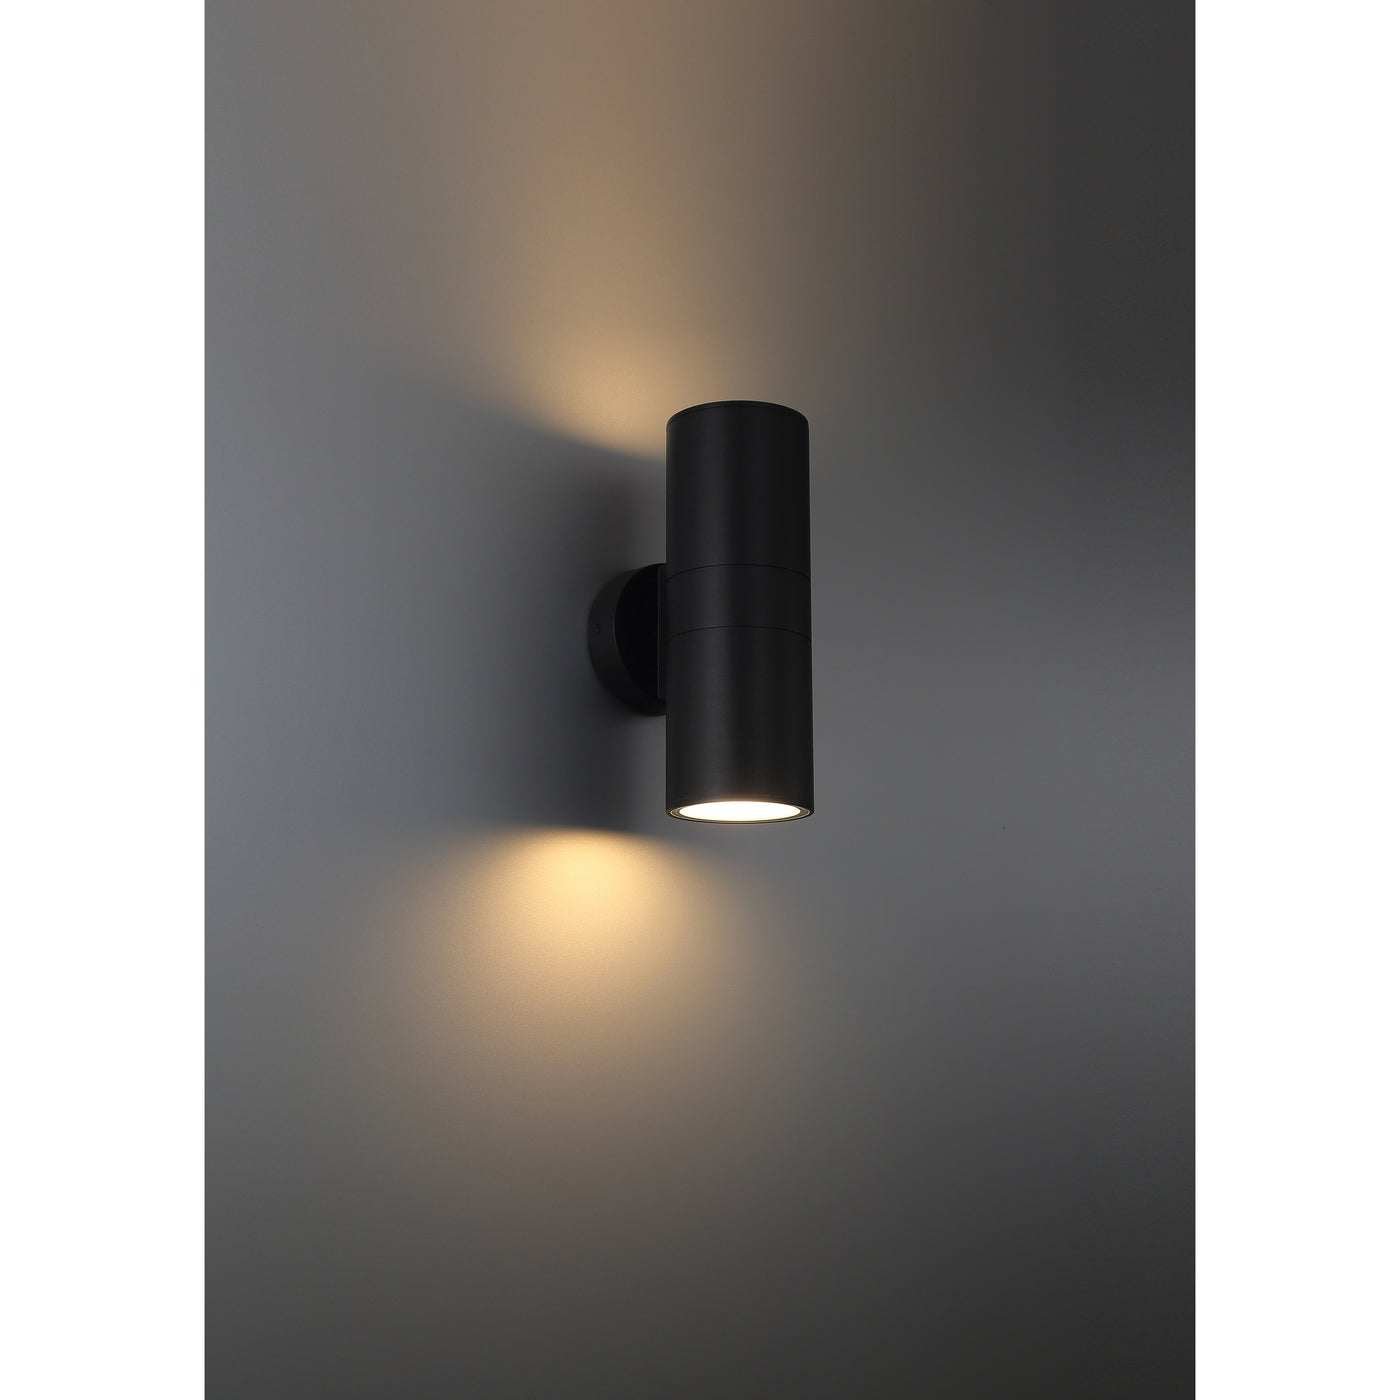 Bi-Directional Outdoor LED Wall Sconce, 1600 Lumens, 20W, 3000K, 120V, Black, Matira Dual Collection